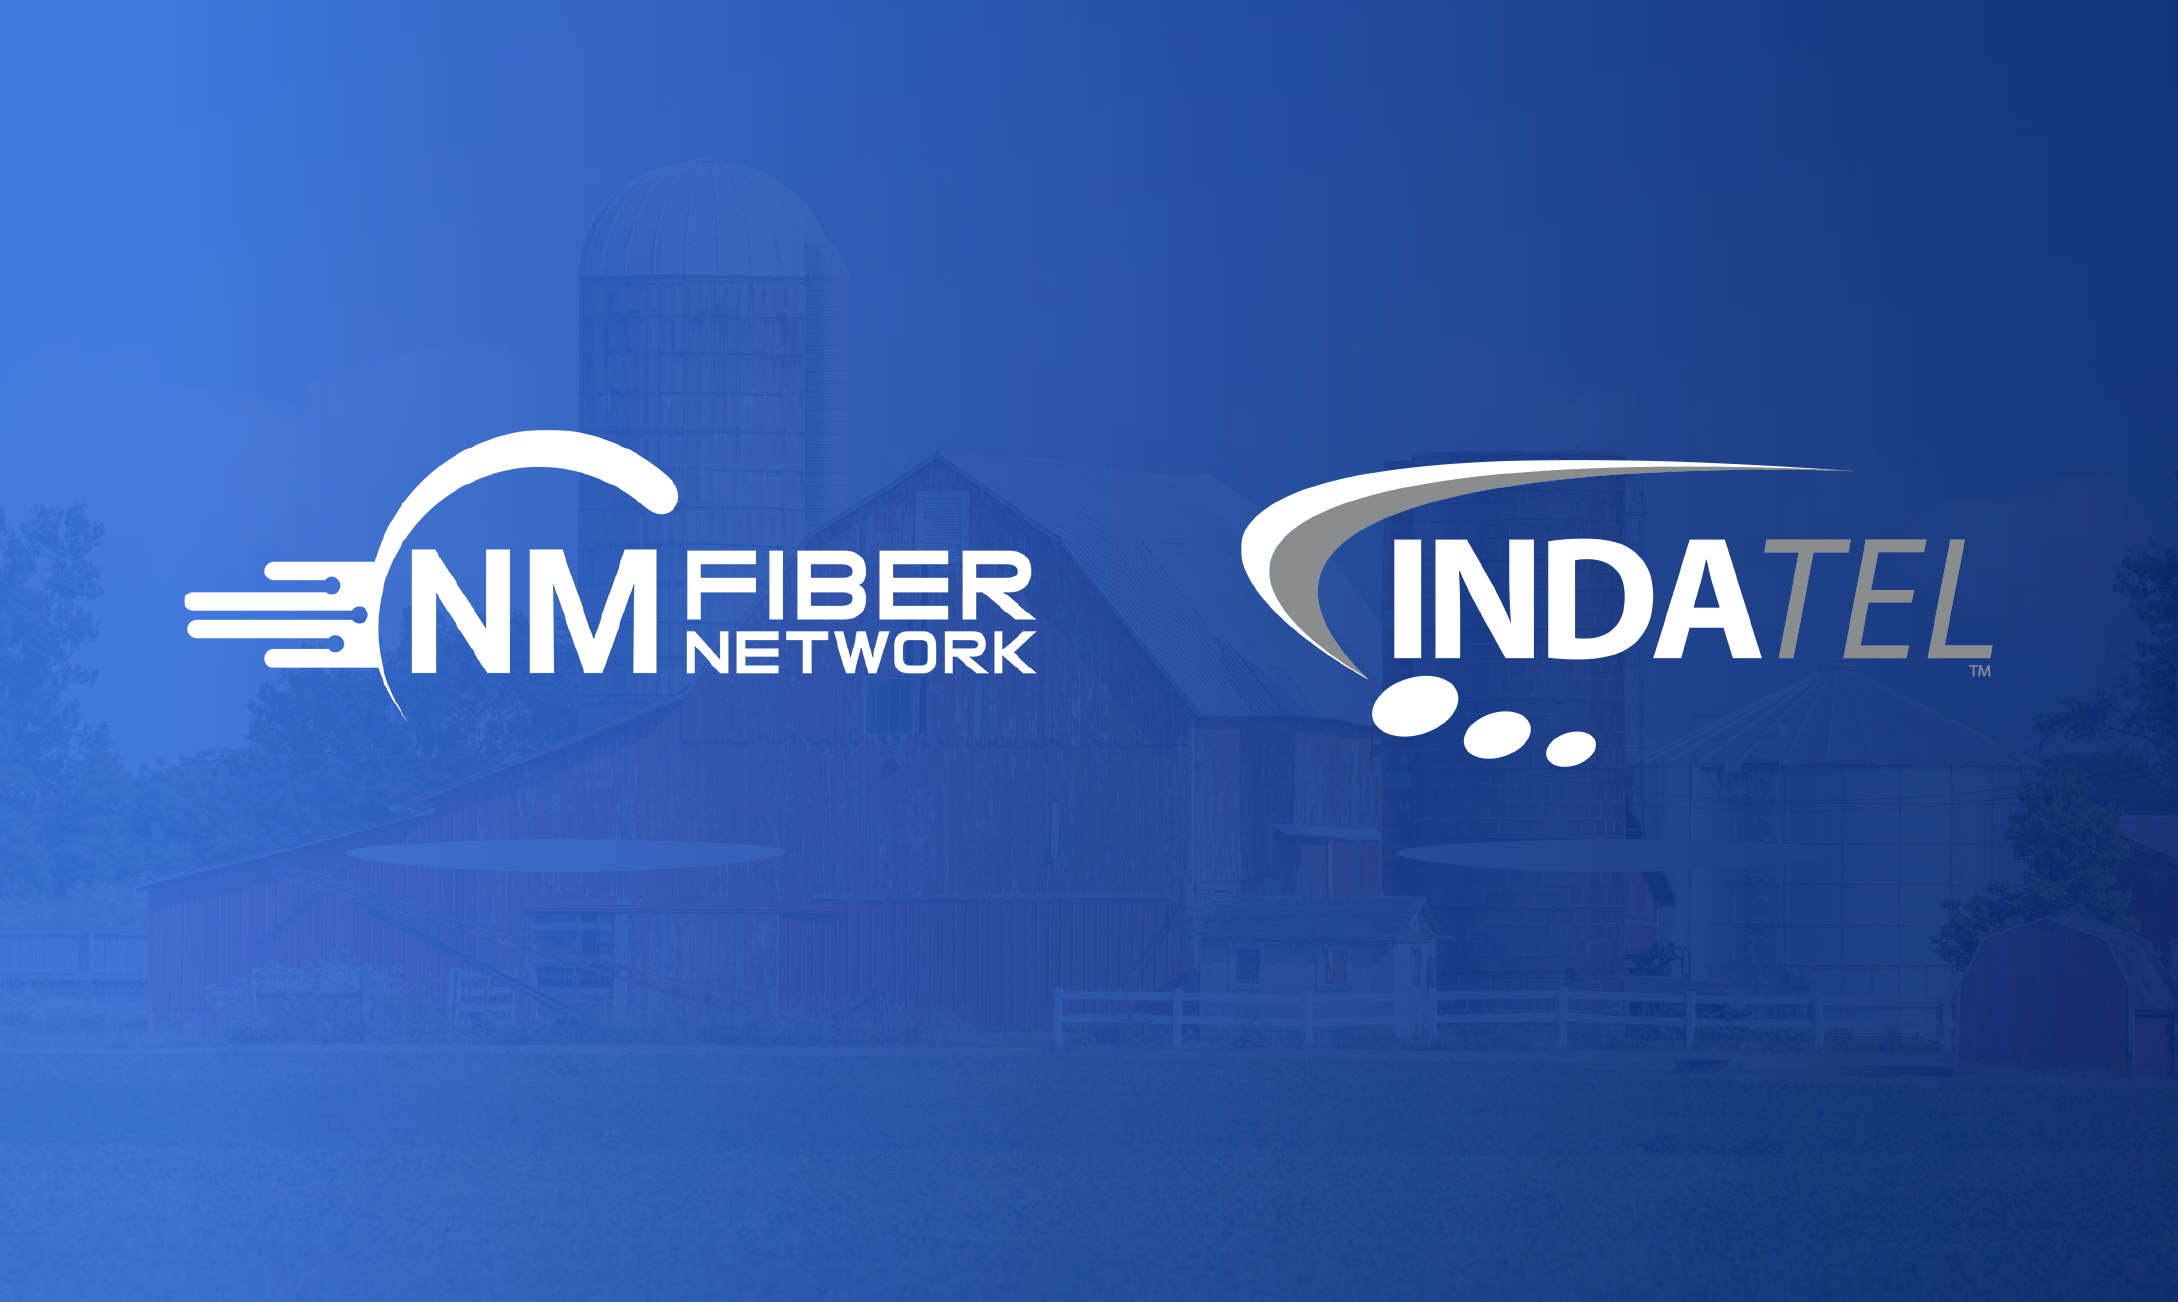 INDATEL Welcomes New Mexico Fiber Network as New Member featured image